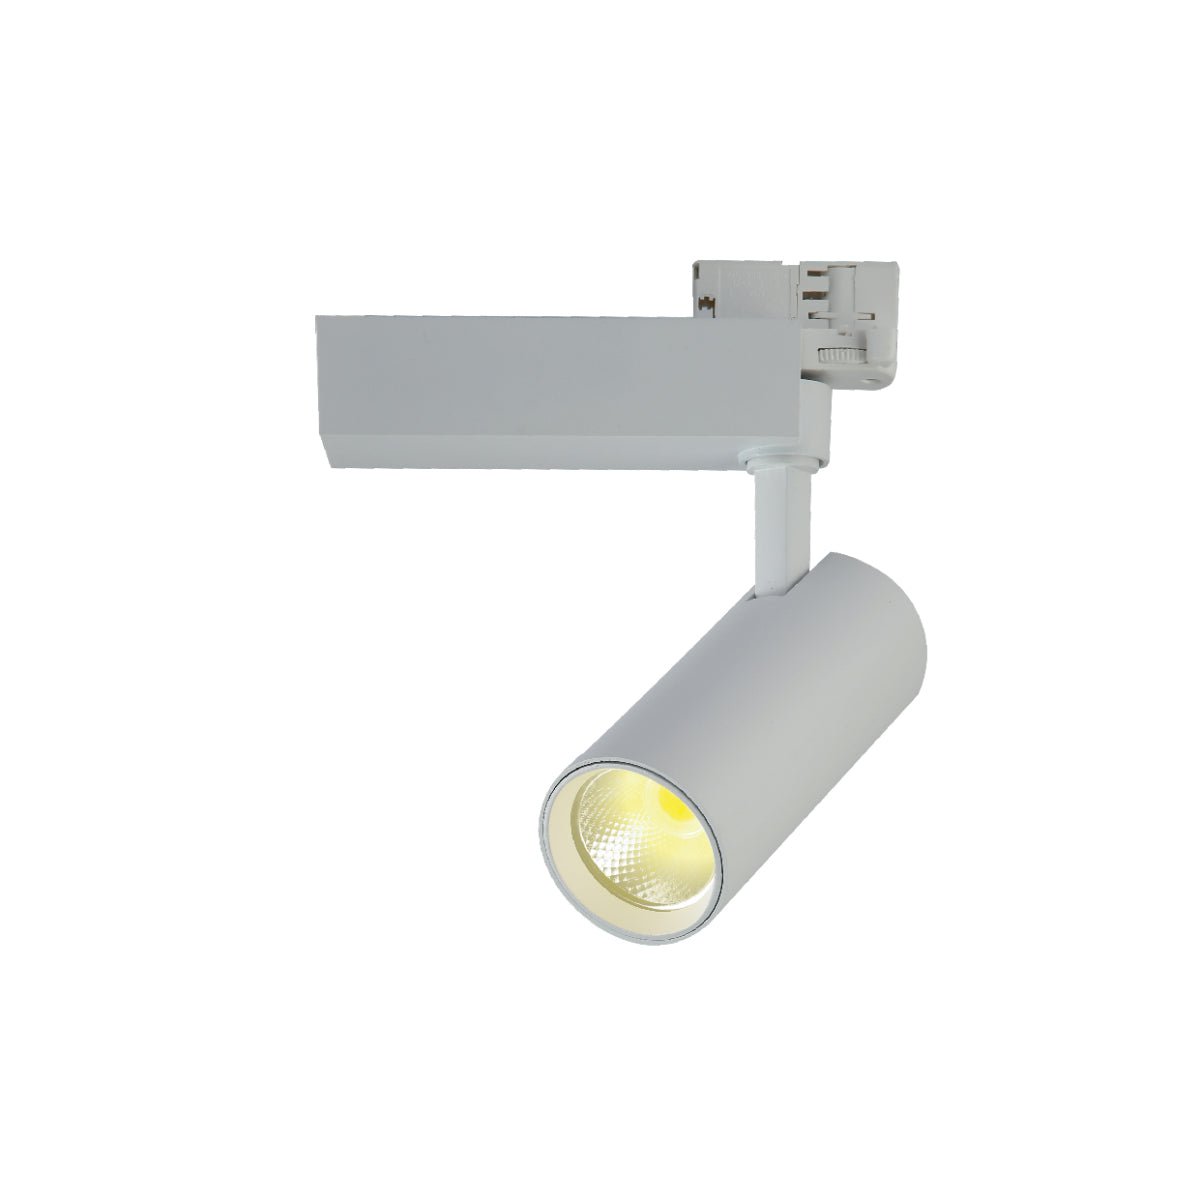 Main image of Tracklight 5-wire 3-Line 20W Cool White 4000K White Body | TEKLED 174-039901